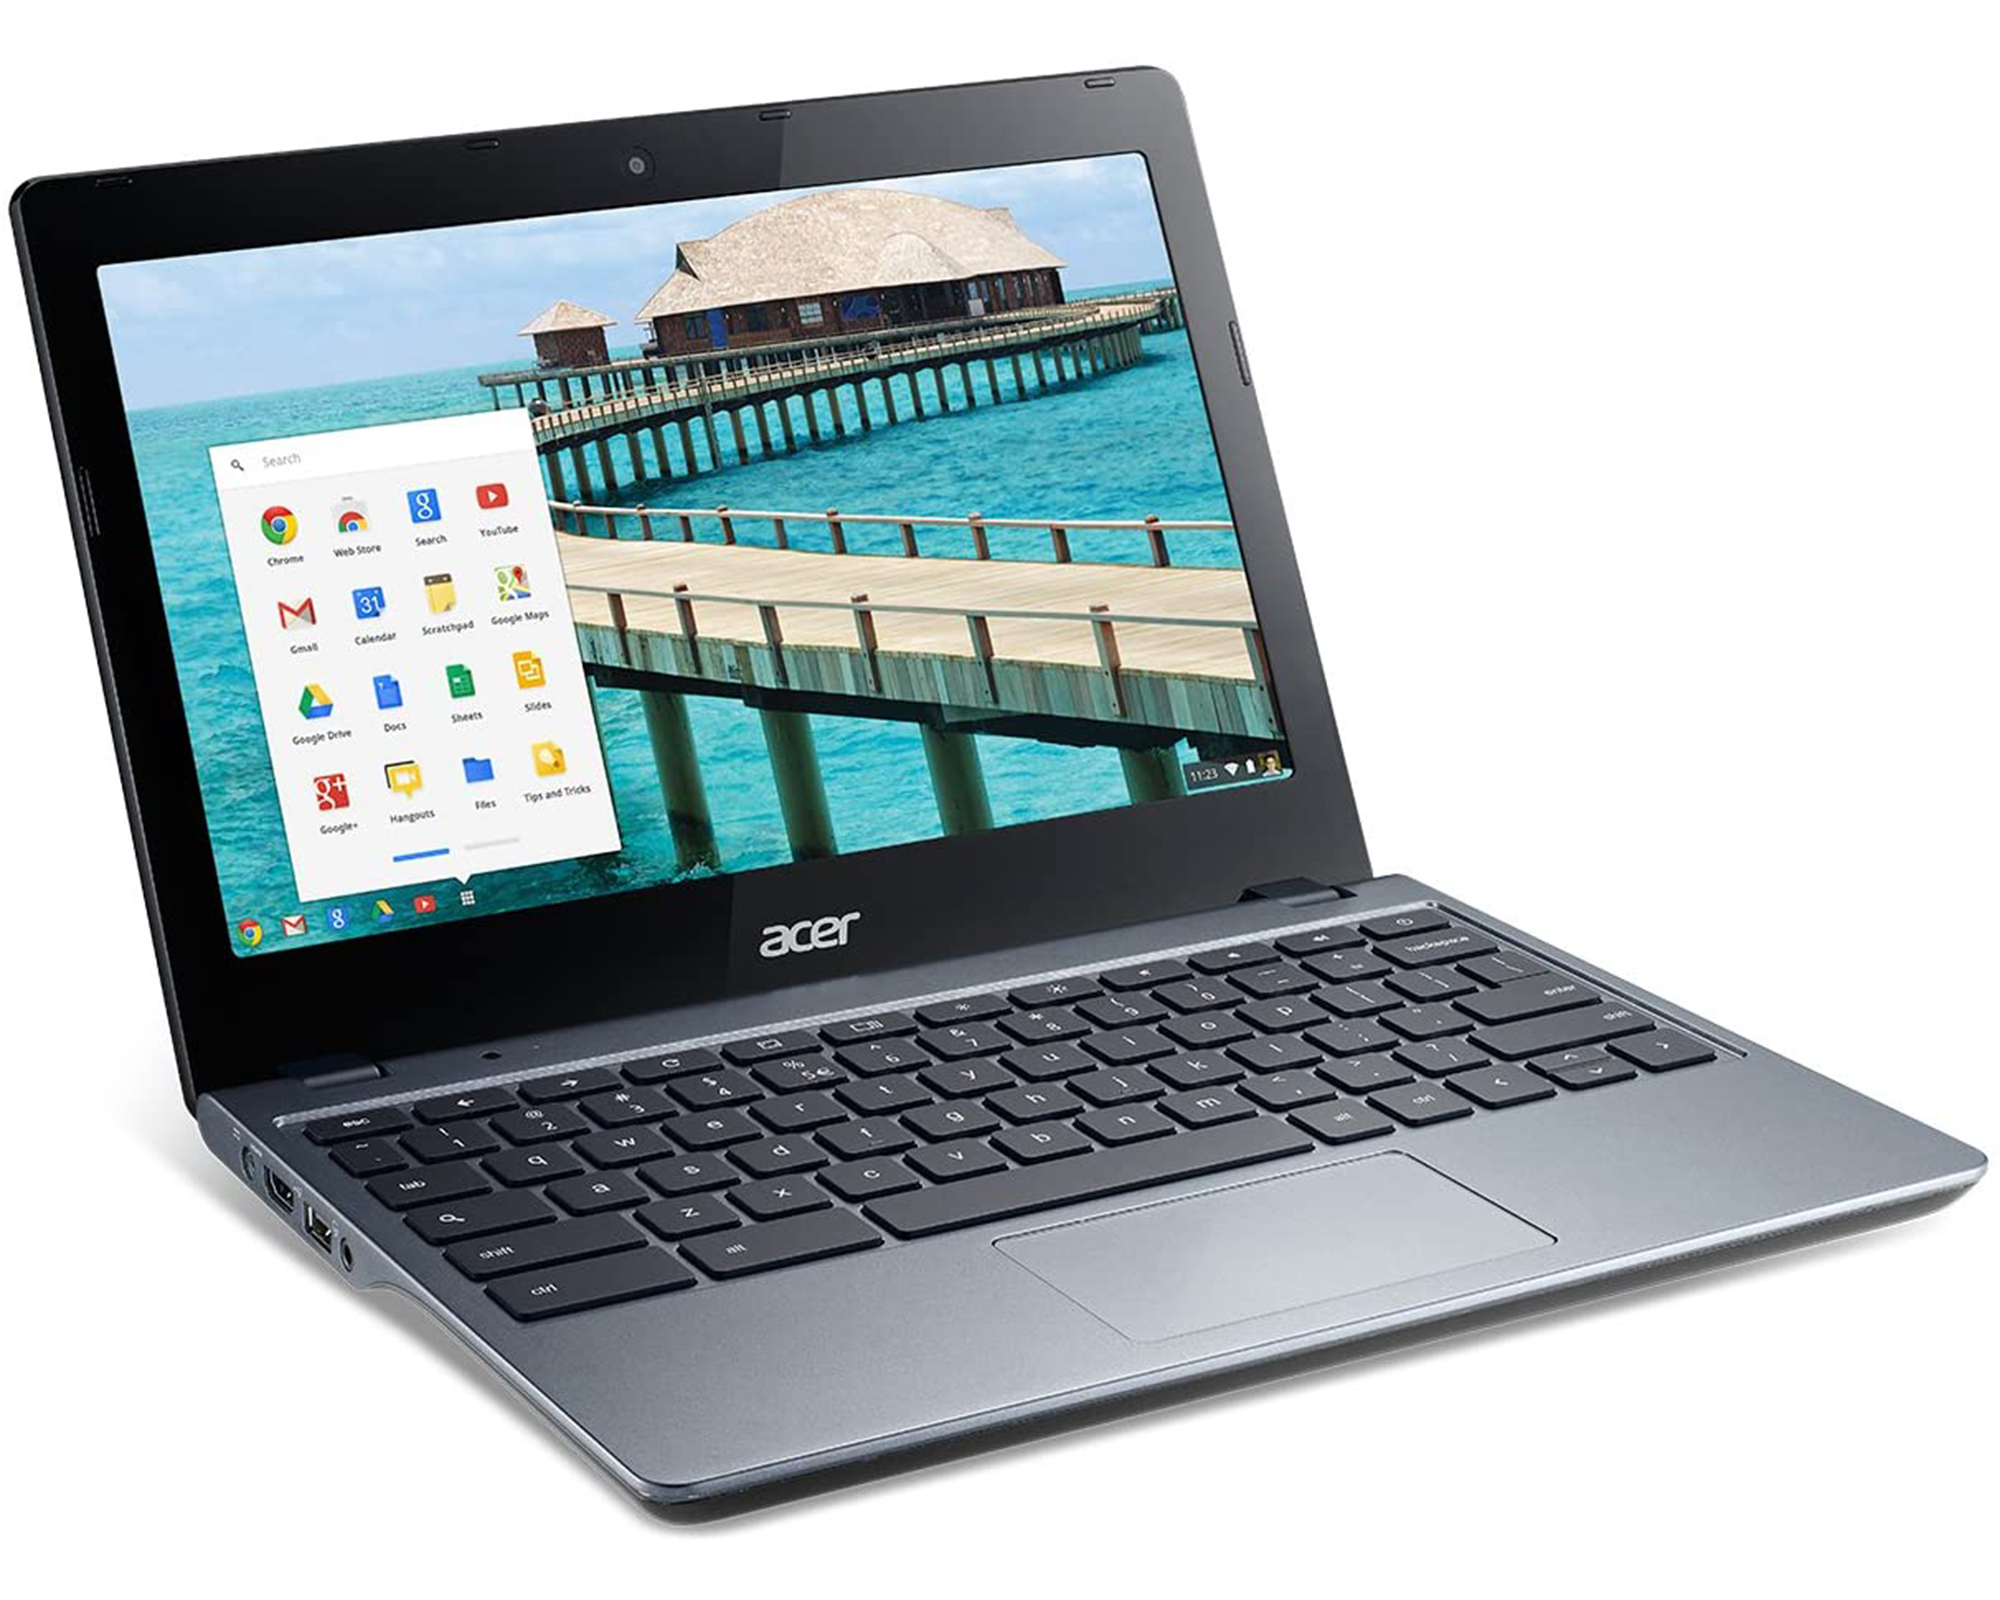 Restored Details about Acer C720-2103 11.6 in chromebook, Intel Celeron 1.4GHz 2GB Ram - image 2 of 8